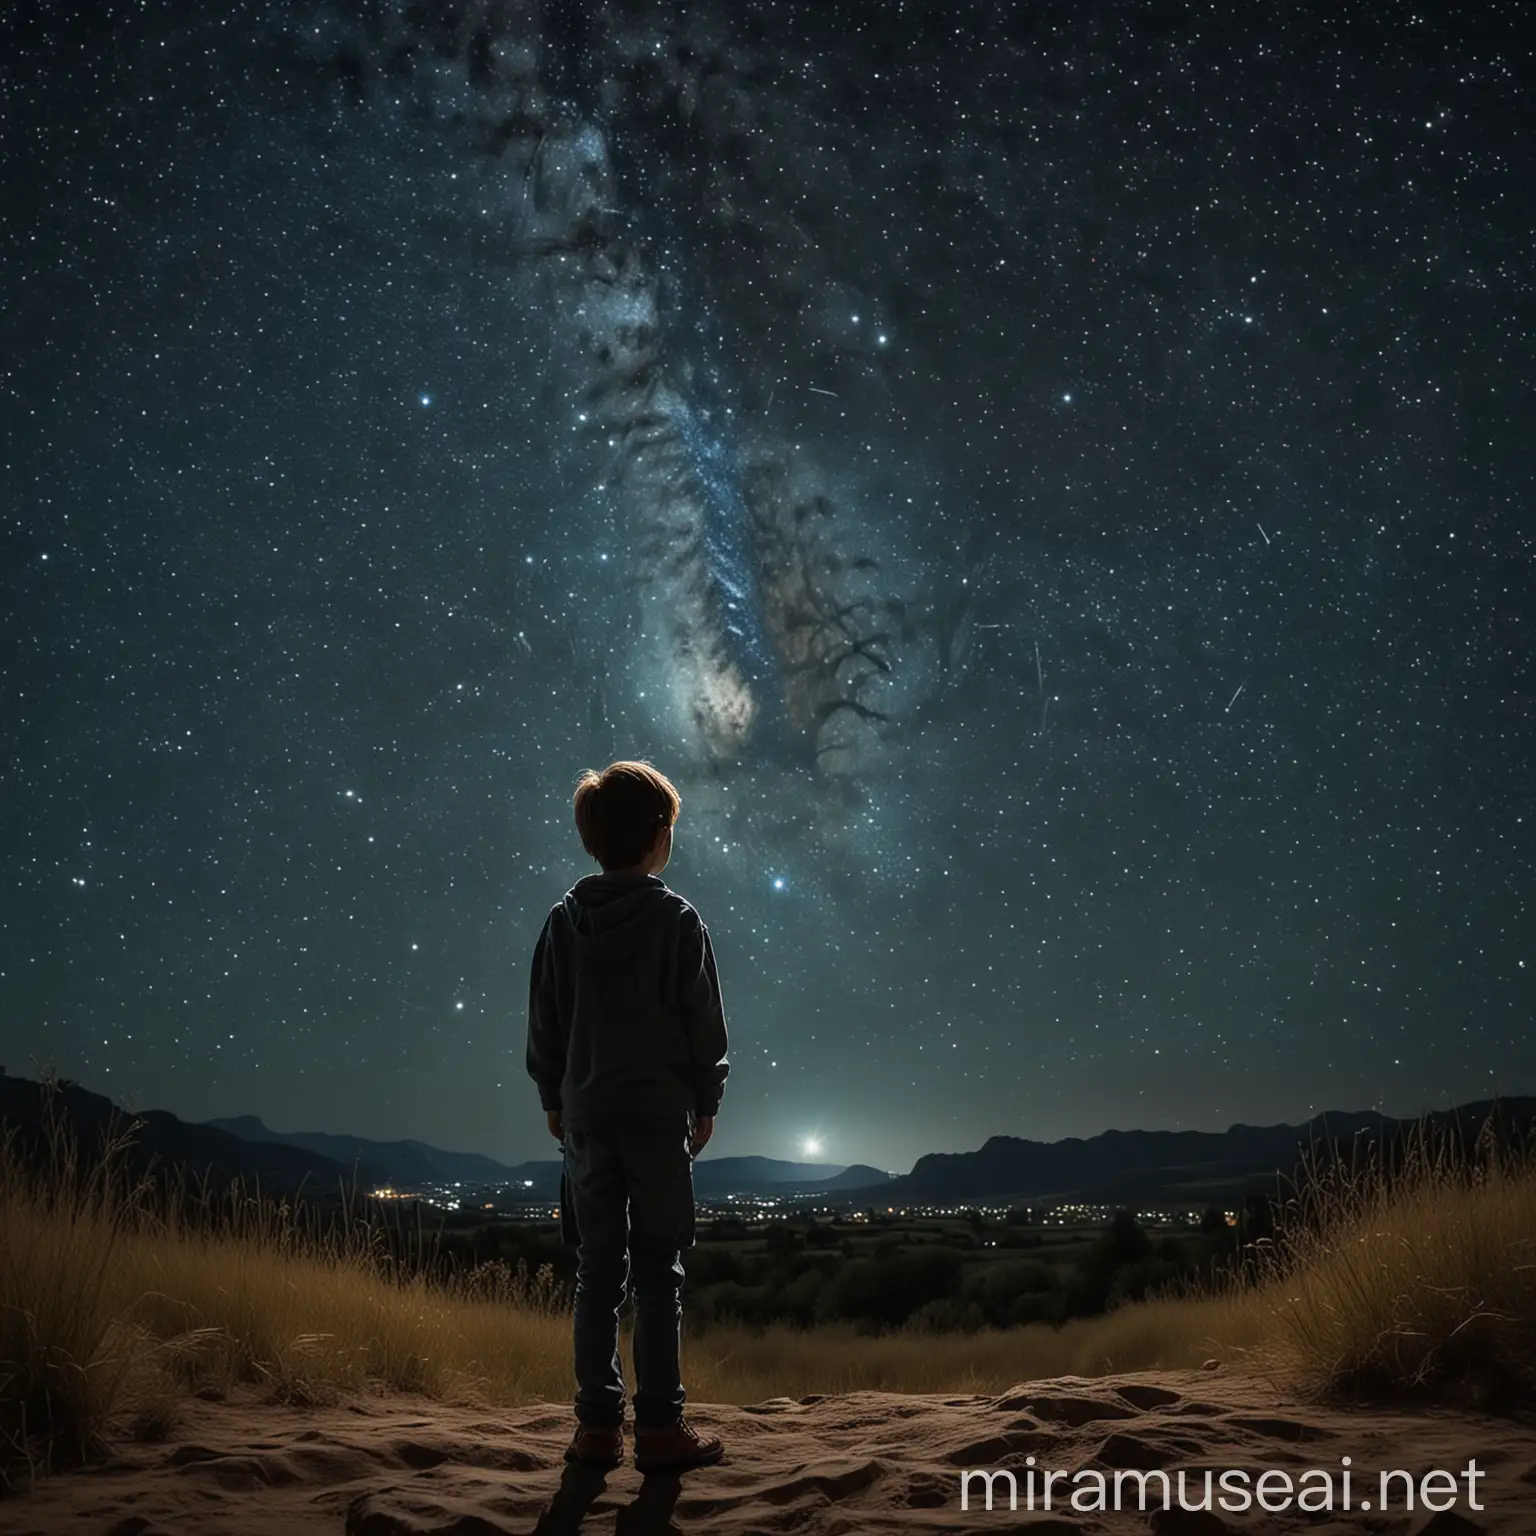 In the picture "the starry night" the boy was looking at the sky from afar